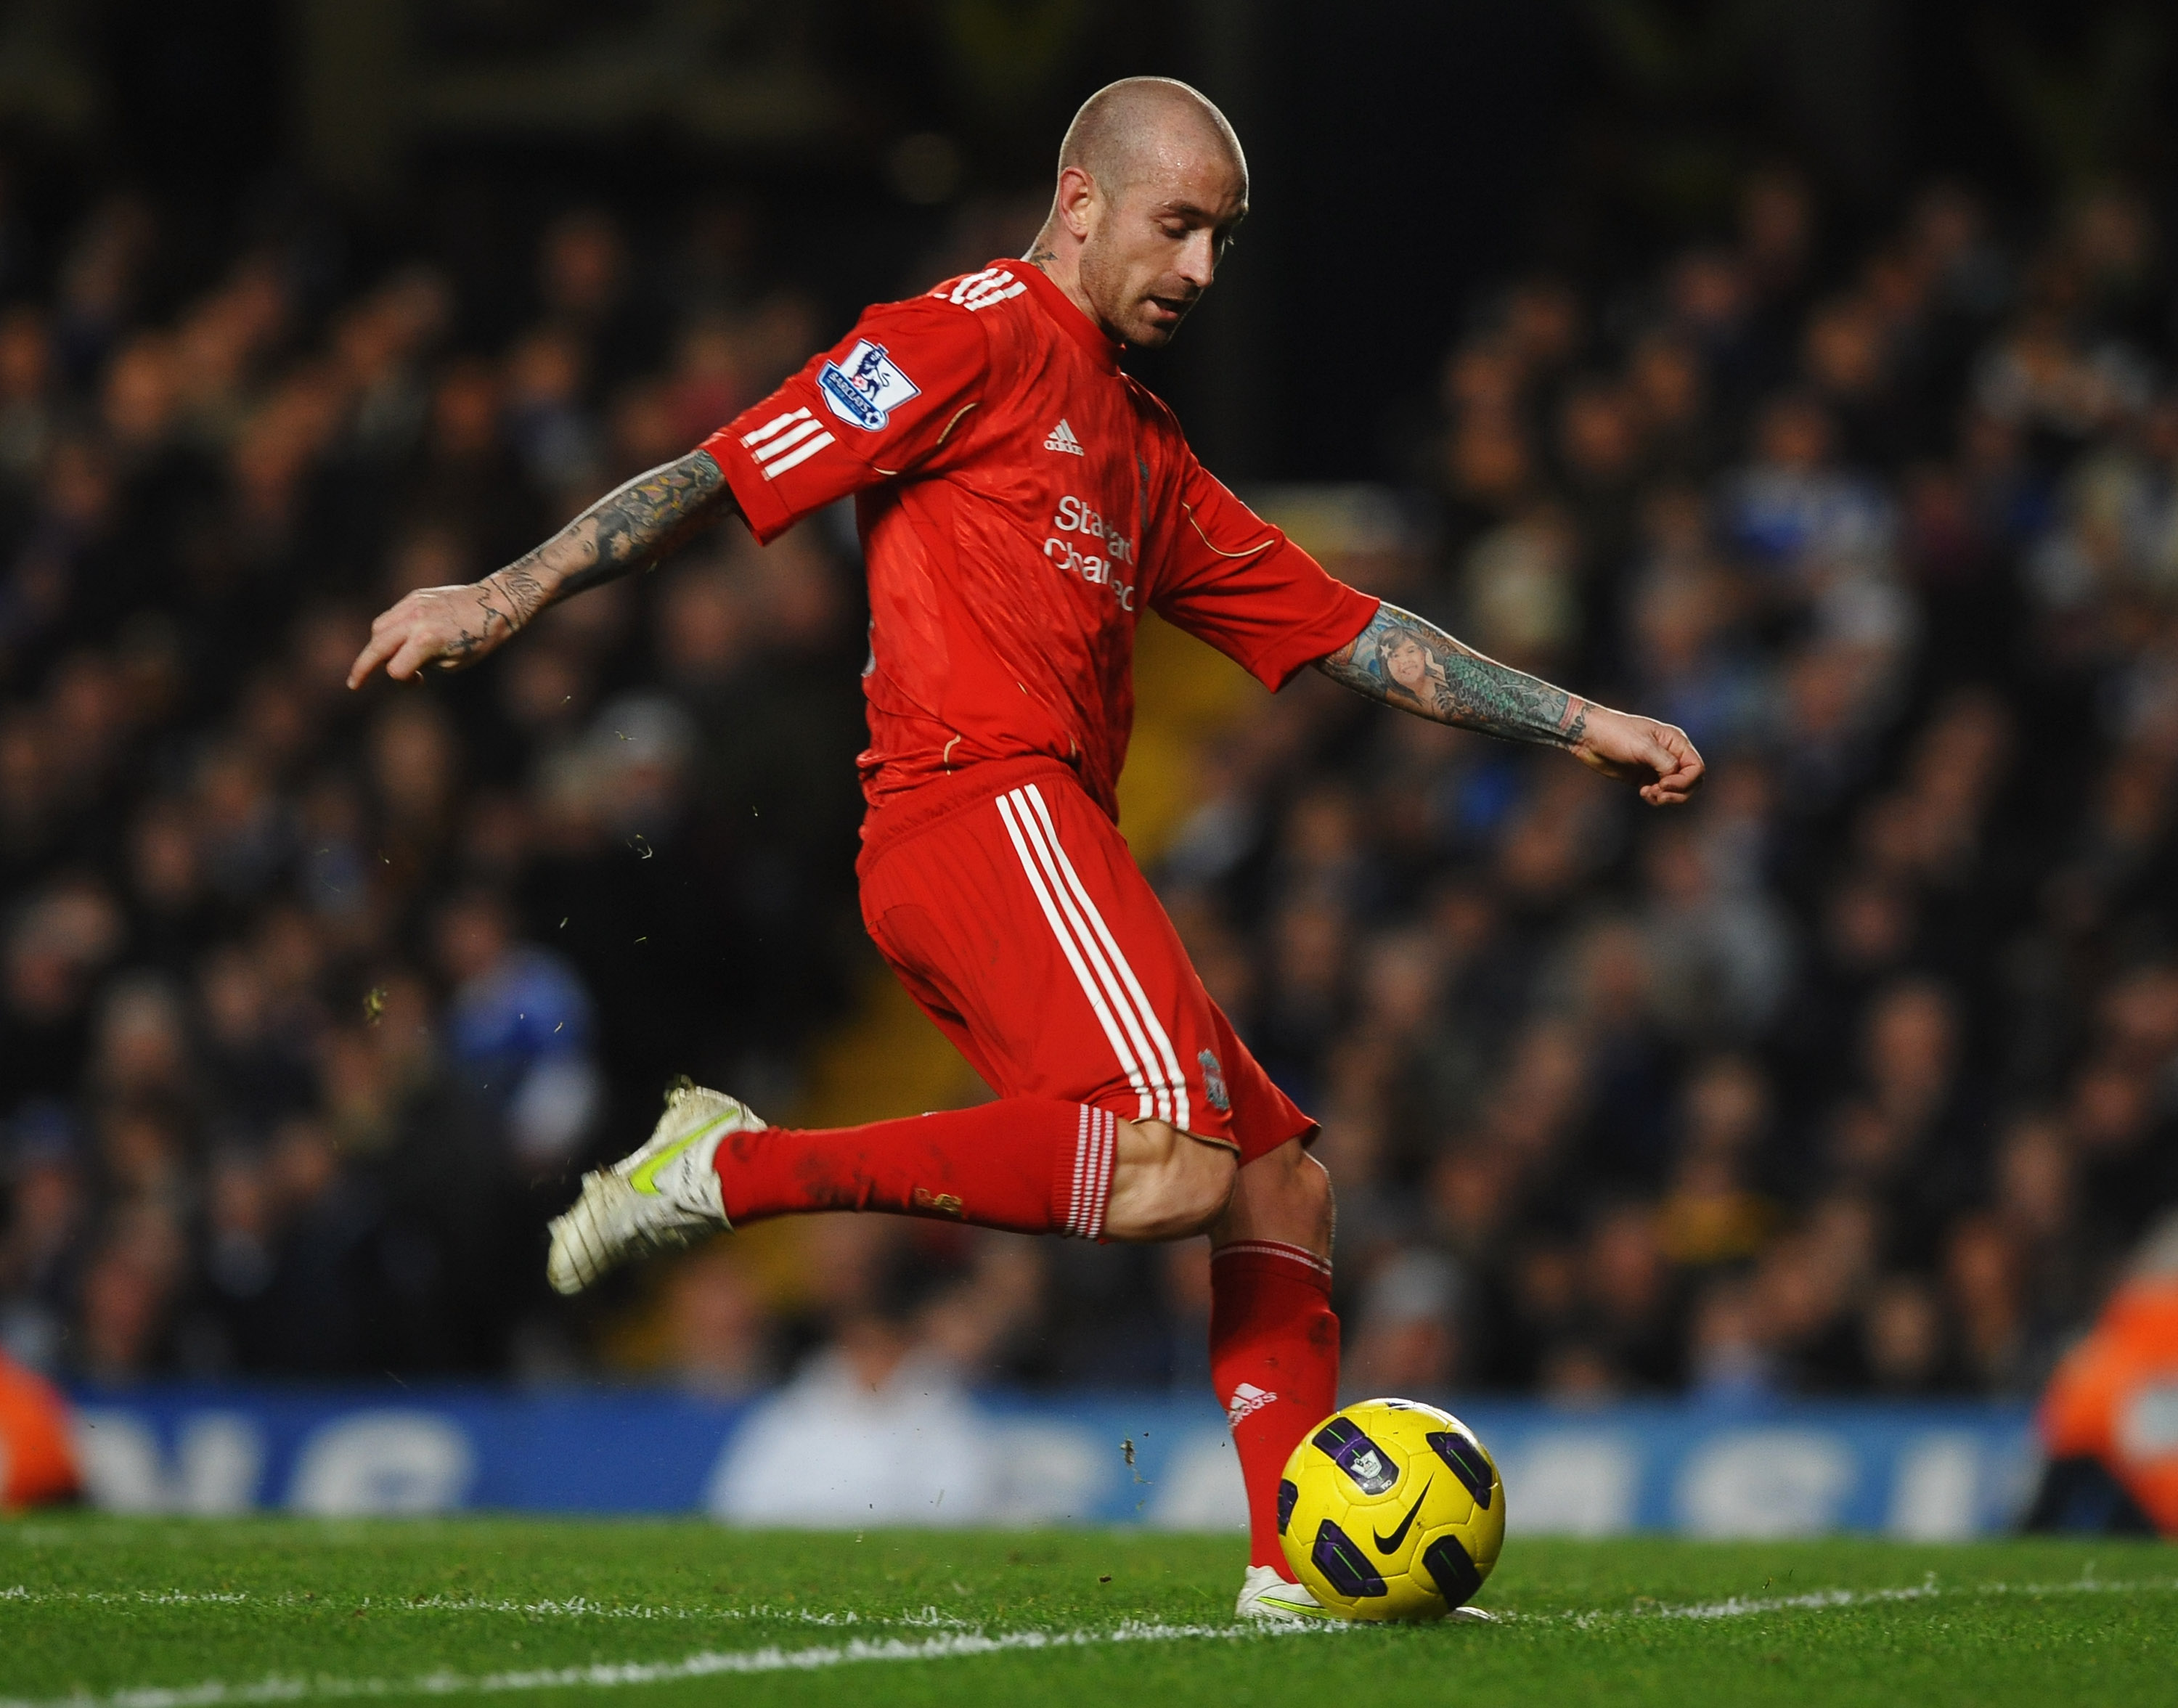 LONDON, ENGLAND - FEBRUARY 06:  Raul Meireles of Liverpool in action during the Barclays Premier League match between Chelsea and Liverpool at Stamford Bridge on February 6, 2011 in London, England.  (Photo by Laurence Griffiths/Getty Images)